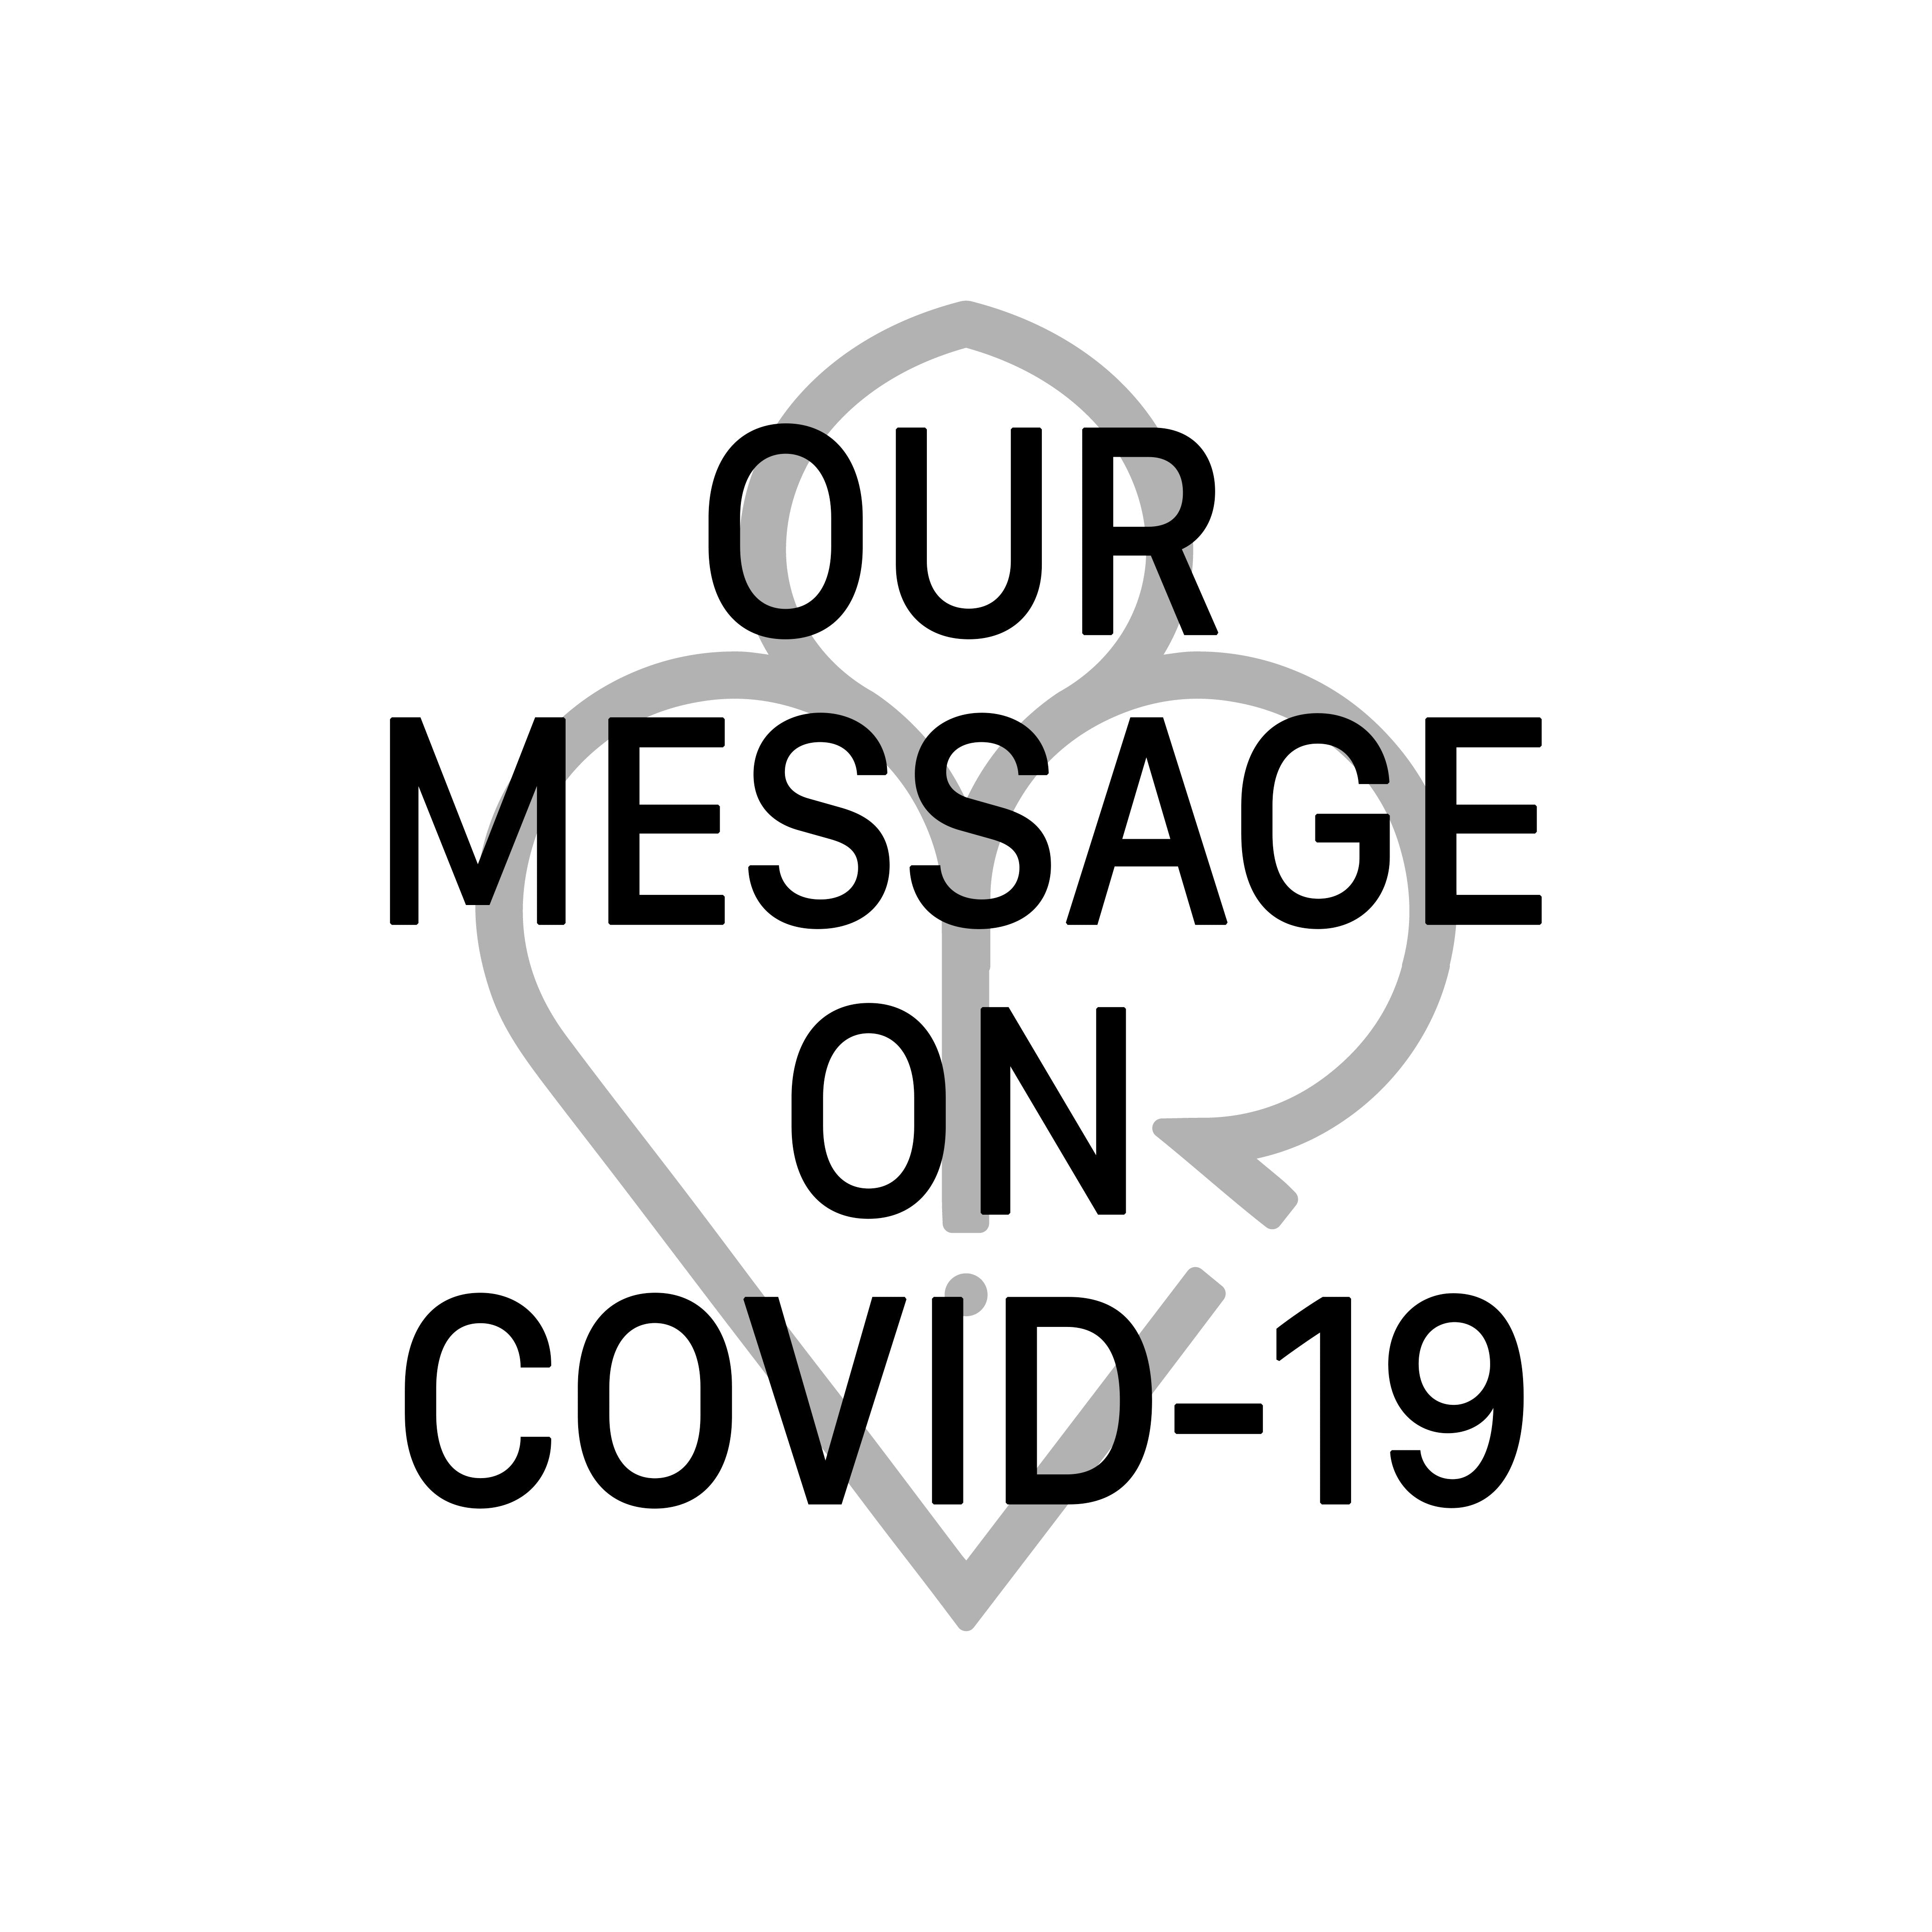 Our Message on COVID-19